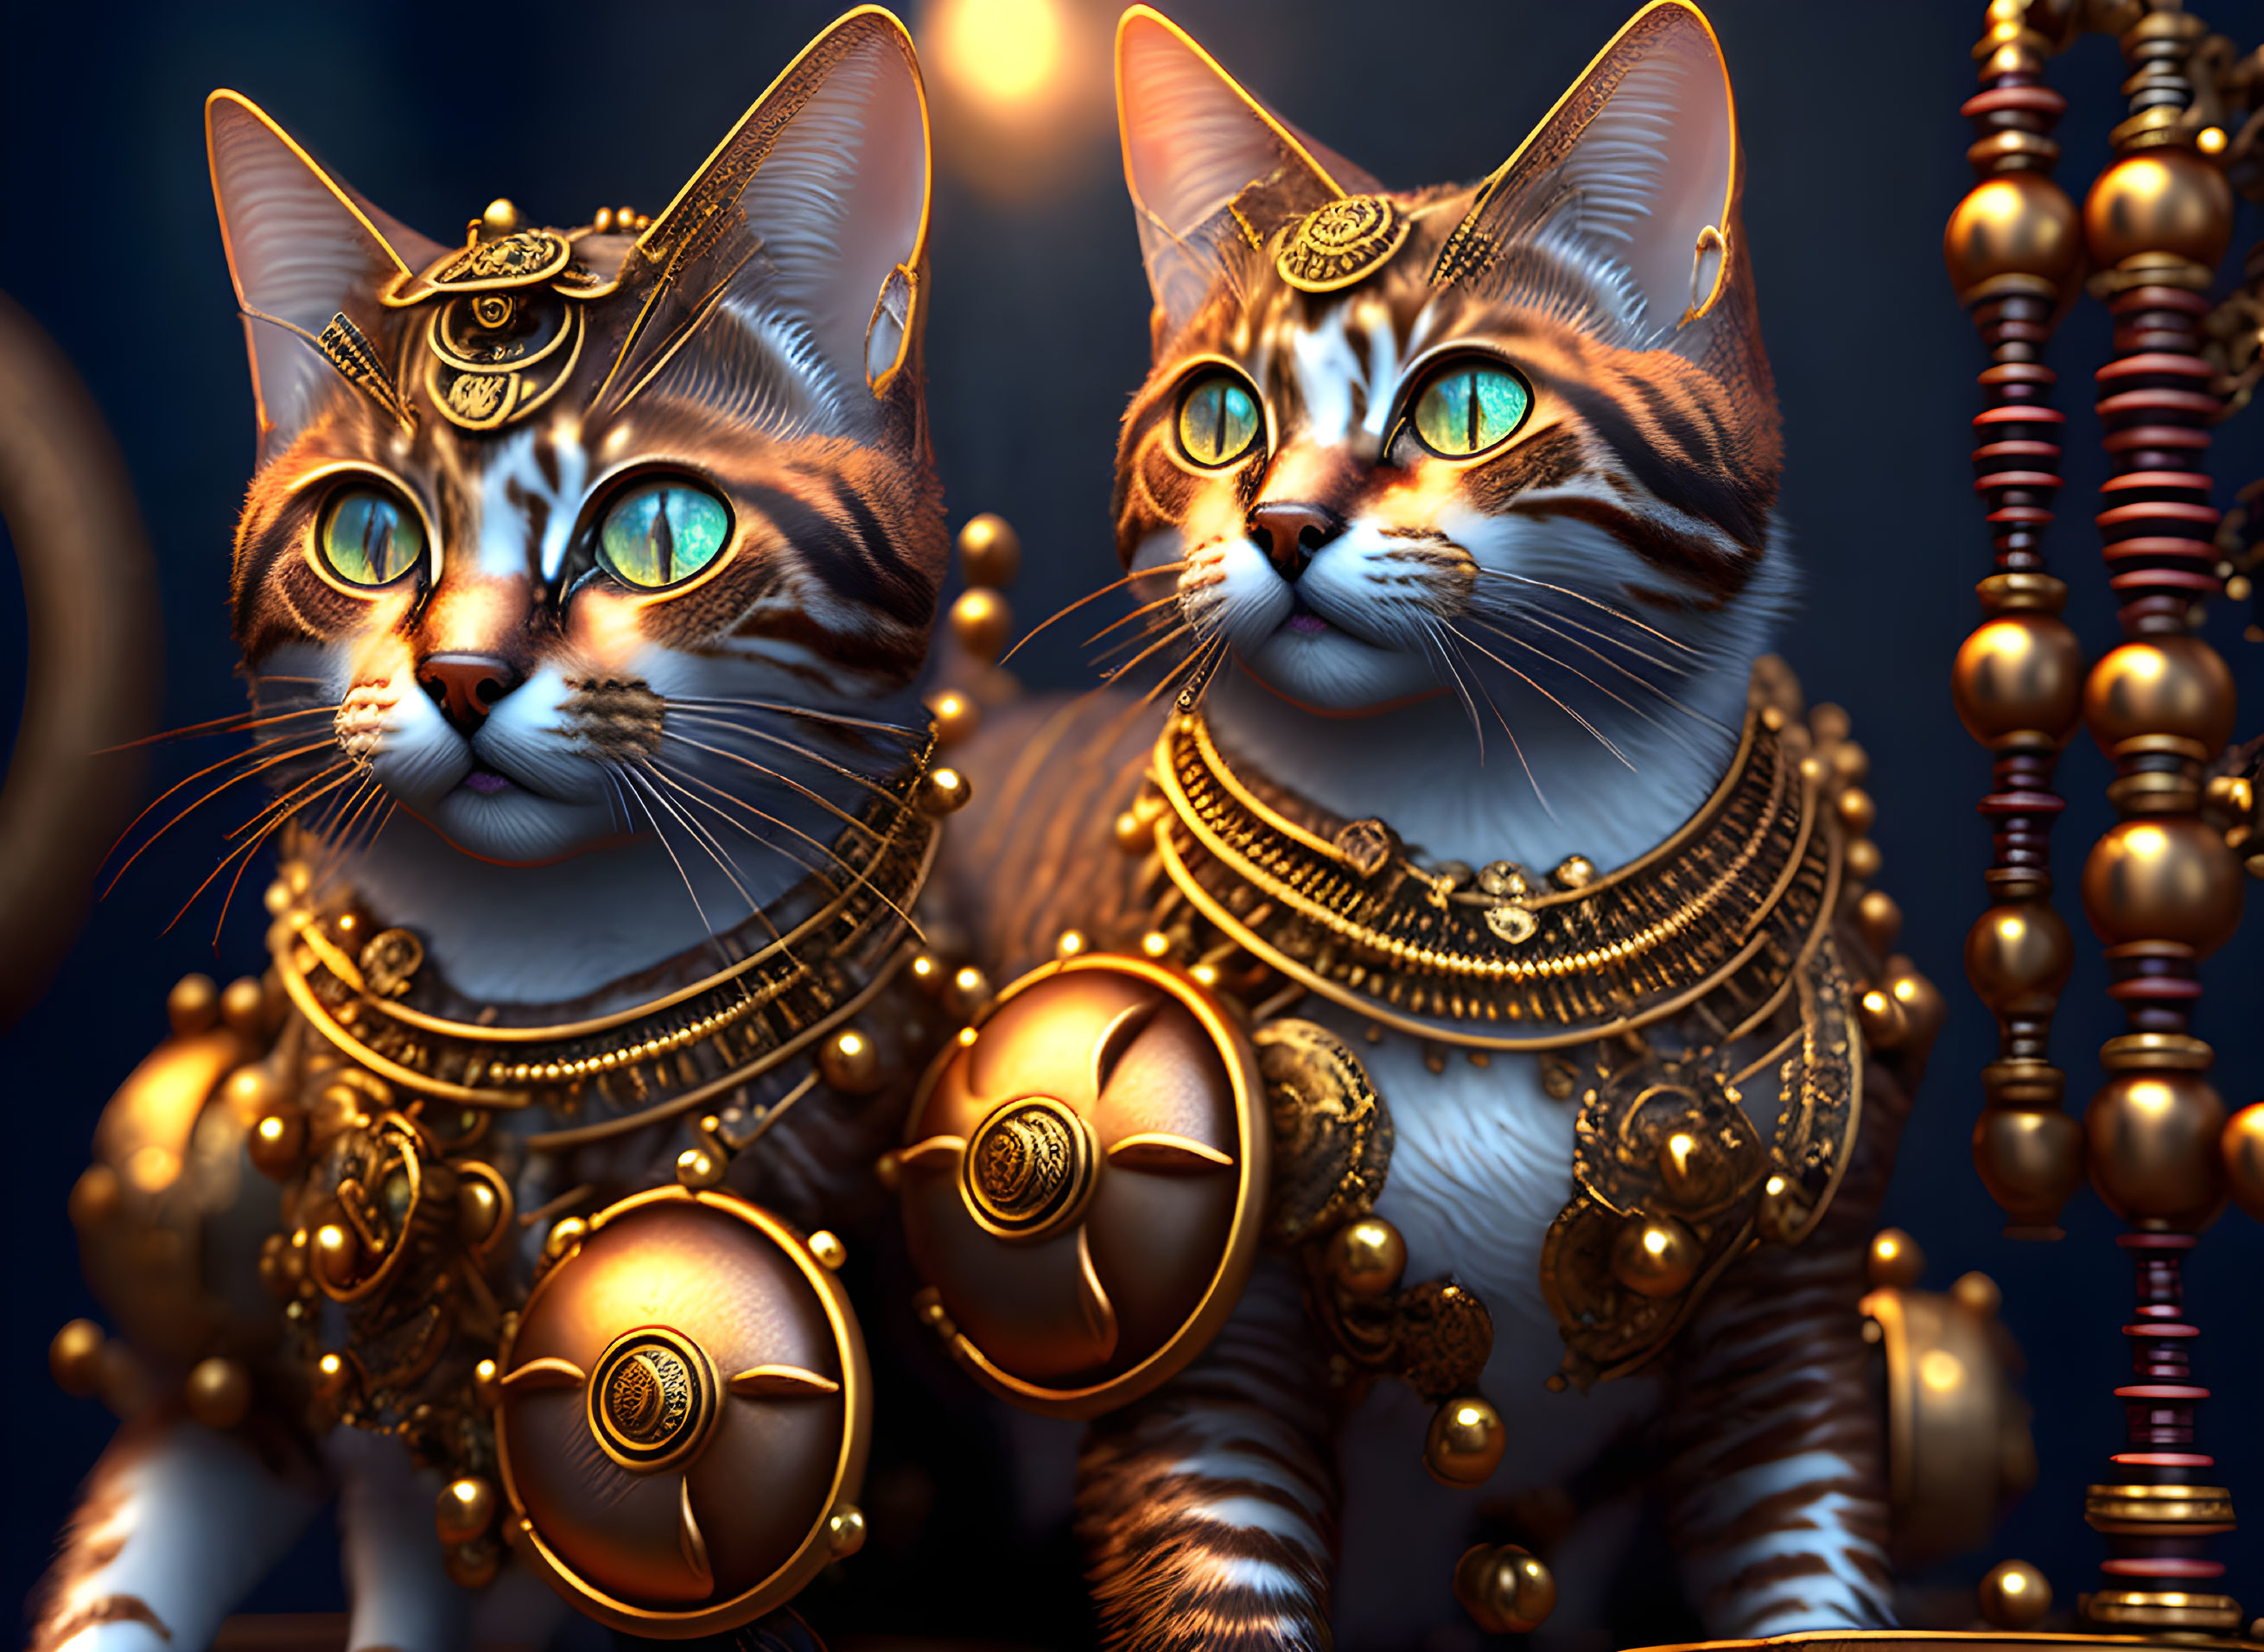 Regal cats in intricate golden jewelry and emblems